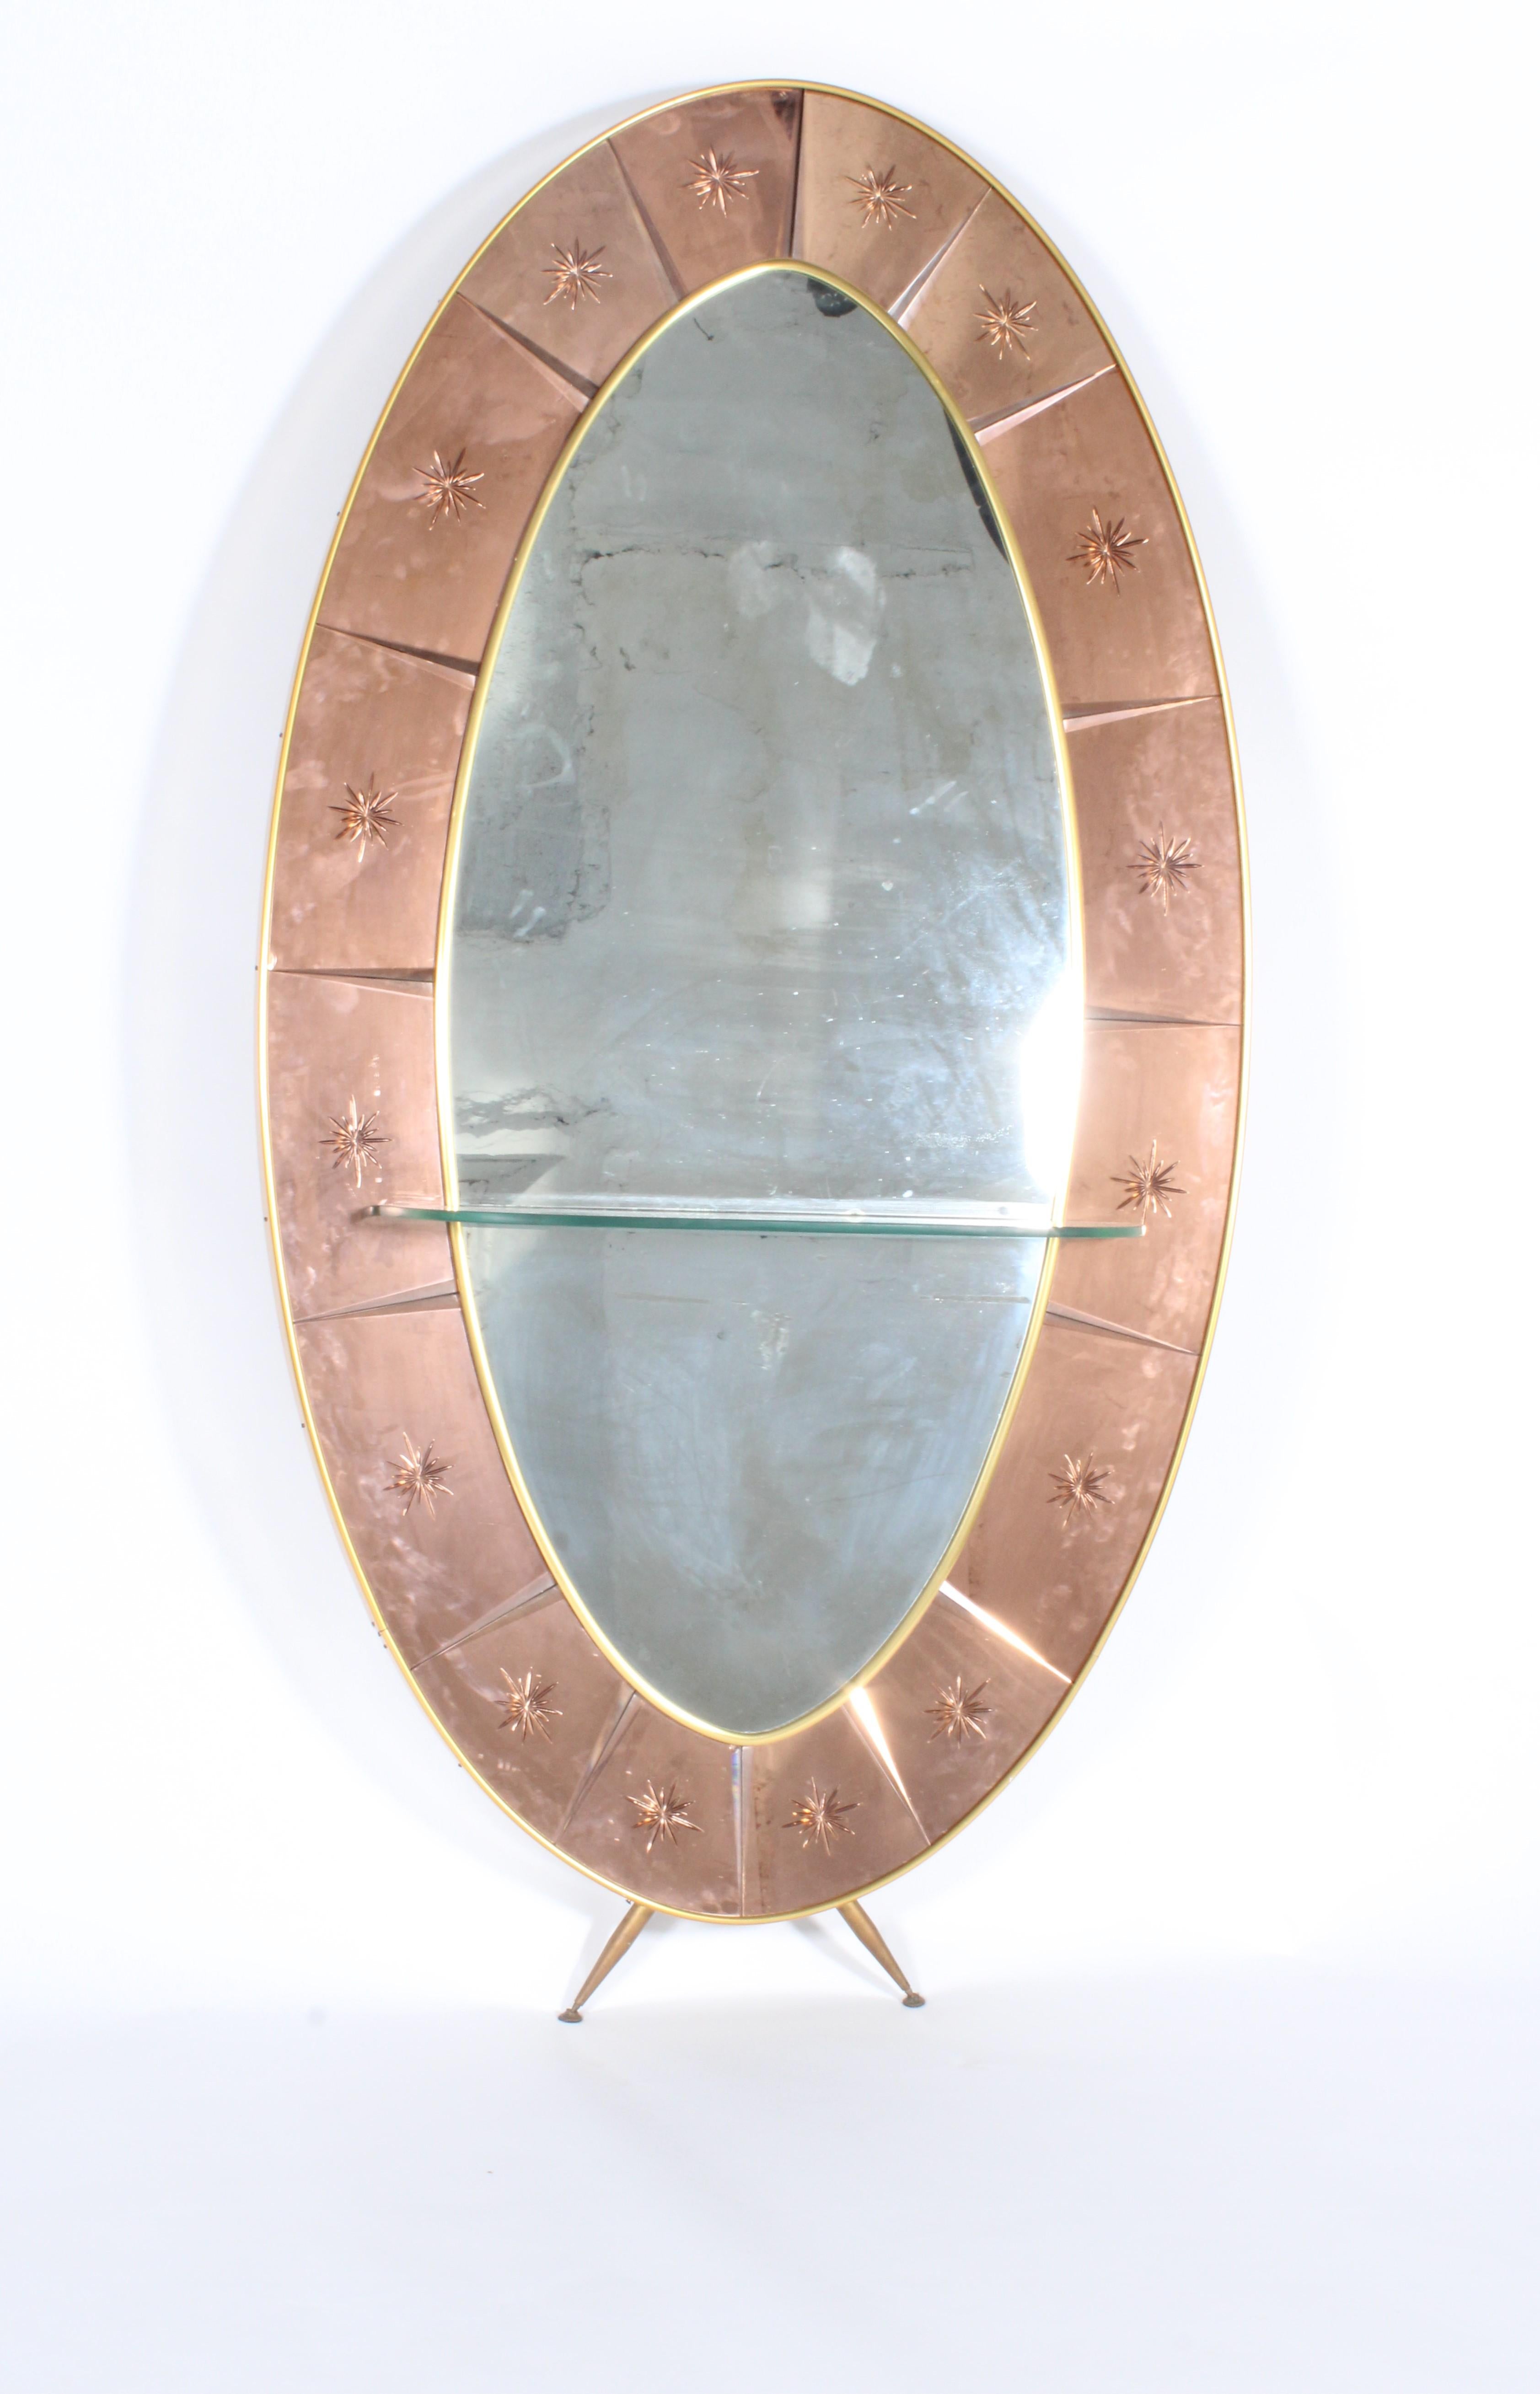 Outstanding untouched original mid century Italian Cristal Arte full length mirror in a super rare pink glass with etched detailing and central console shelf. Sourced directly from a private collection in Turin, Italy this example is presented in